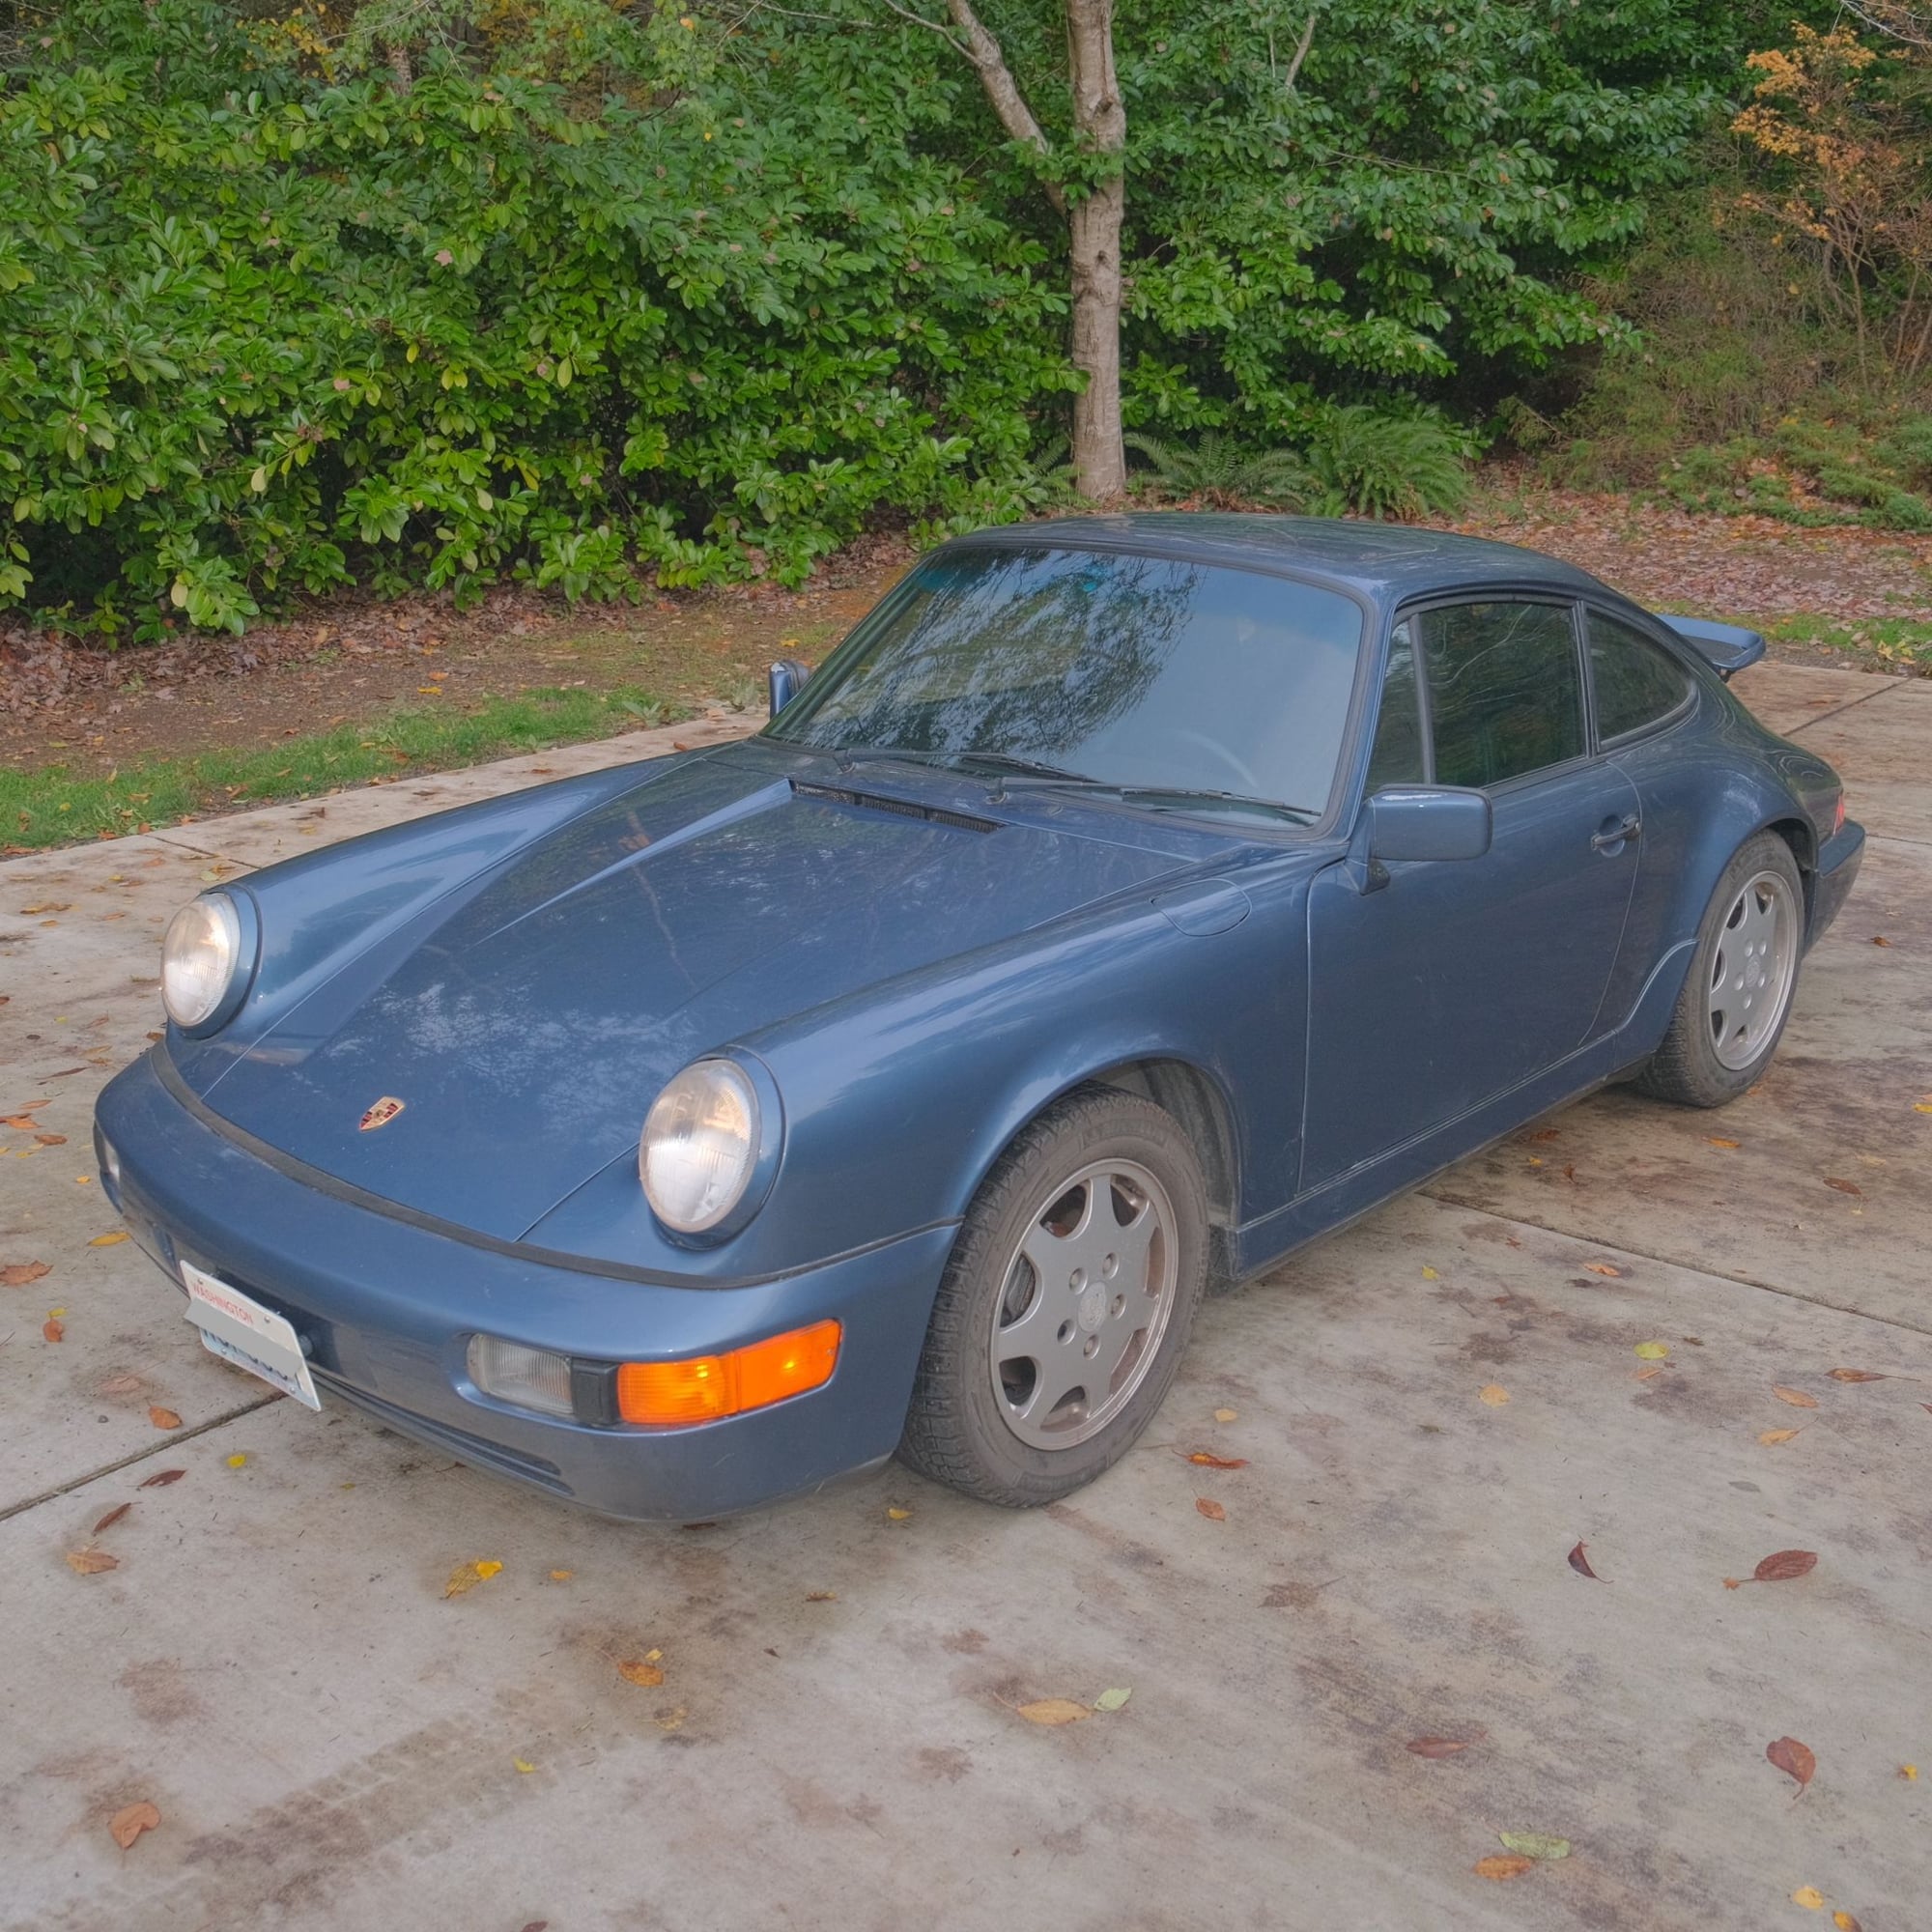 1990 Porsche 911 - 1990 C4 Coupe - Used - VIN WP0AB2964LS451751 - 6 cyl - AWD - Manual - Coupe - Blue - Poulsbo, WA 98370, United States